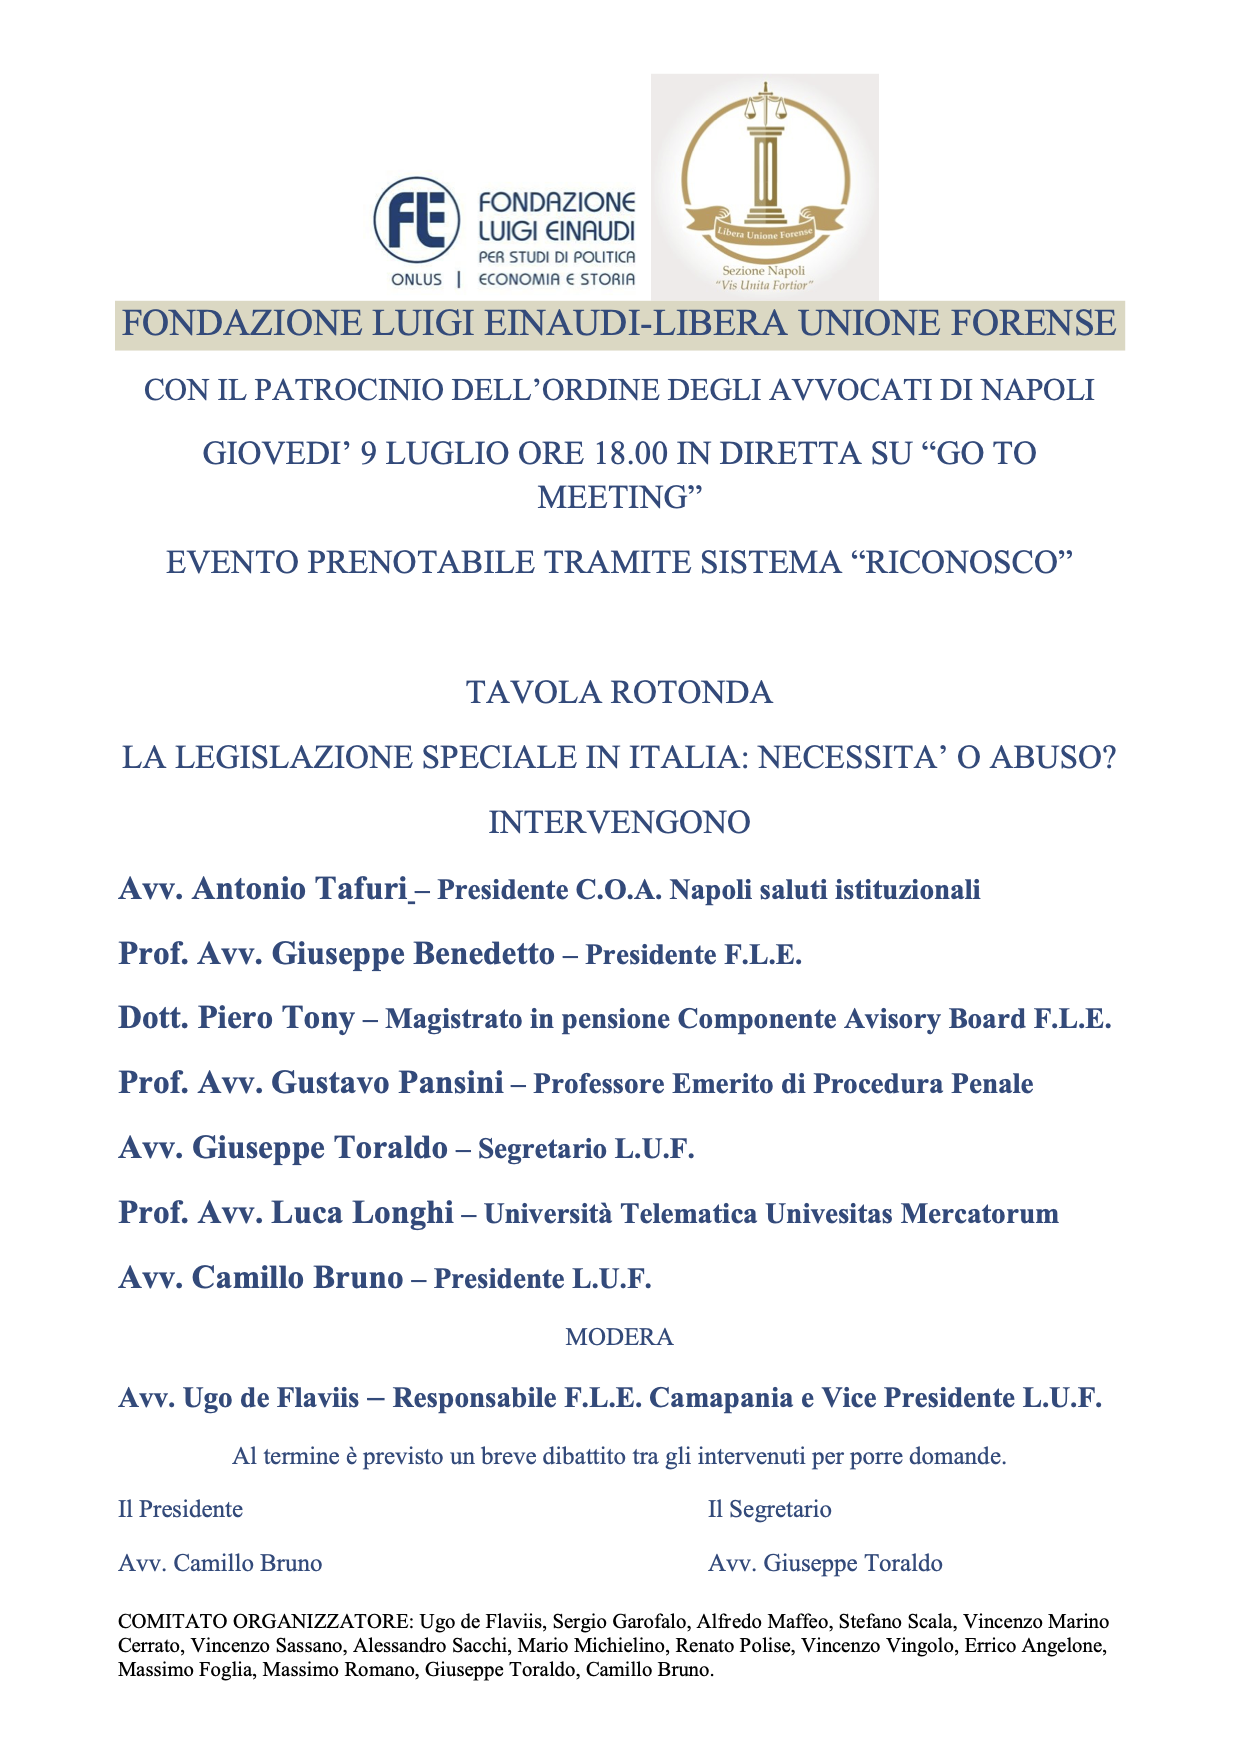 Special legislation in Italy: necessity or abuse?